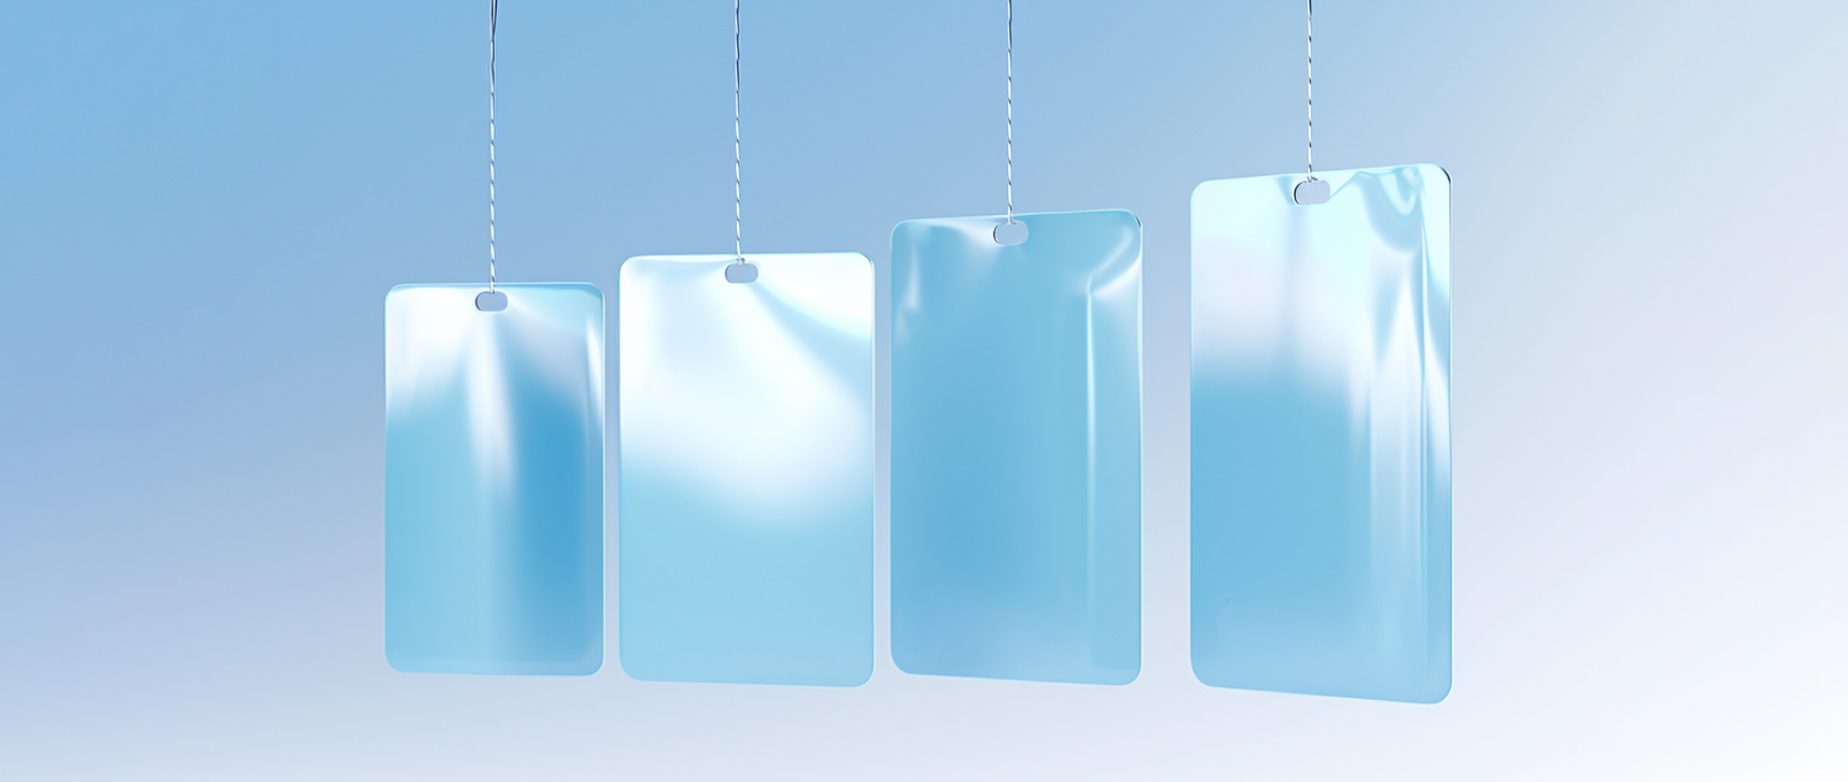 Four shiny blue price tags on a blue and white background.